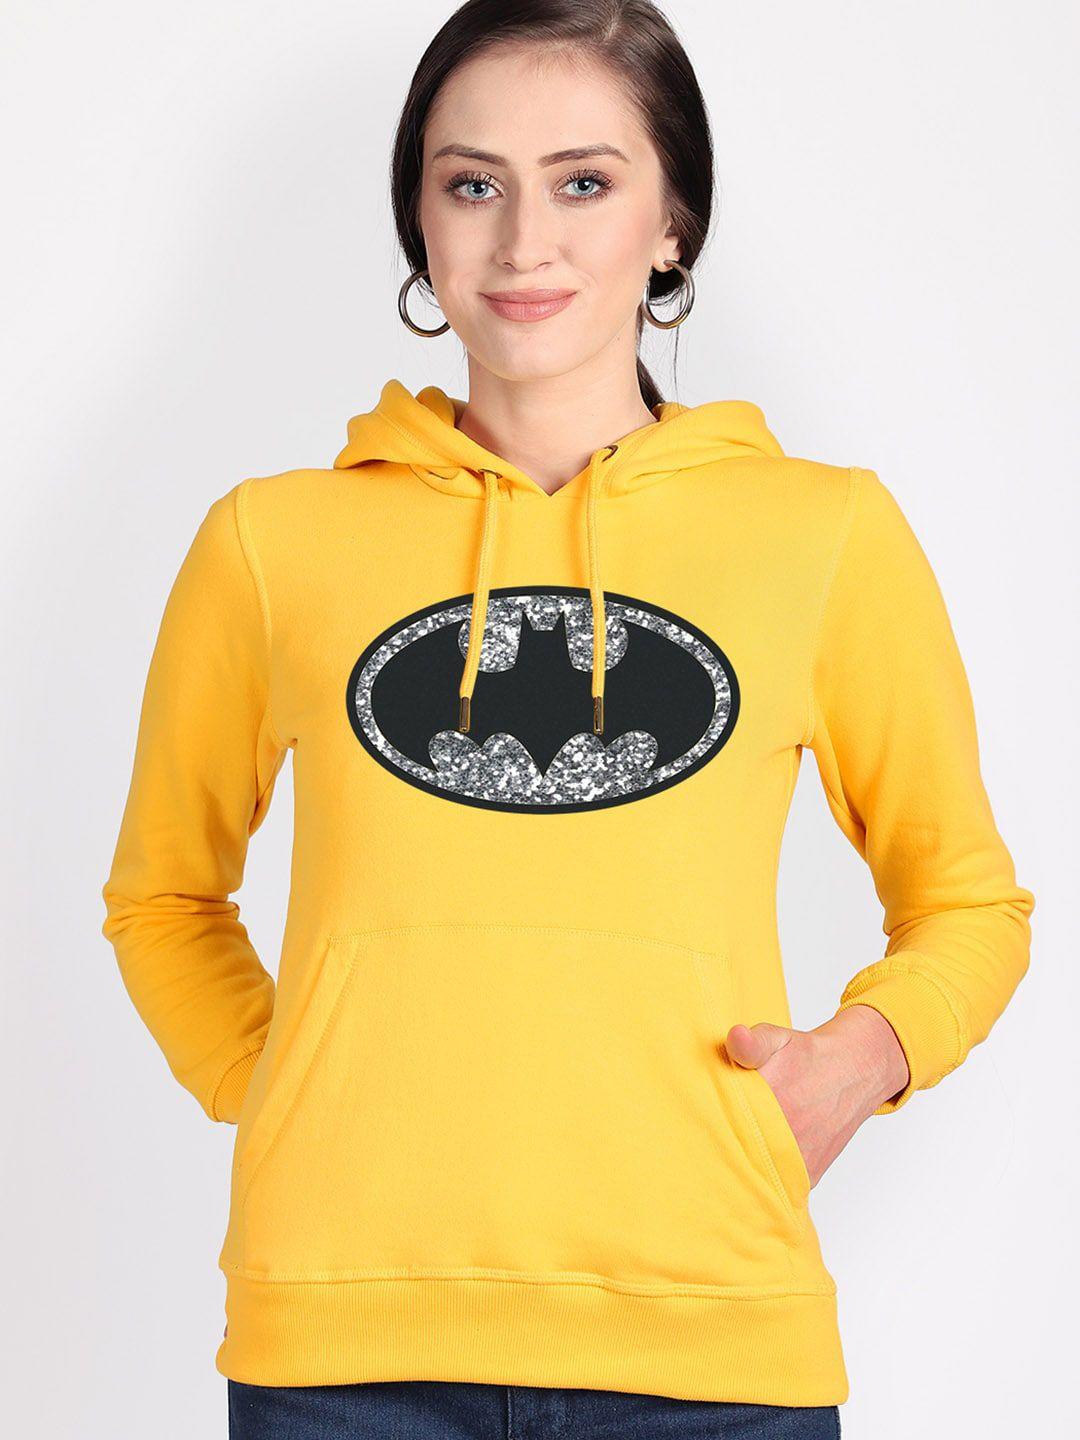 free authority batman printed hooded pullover